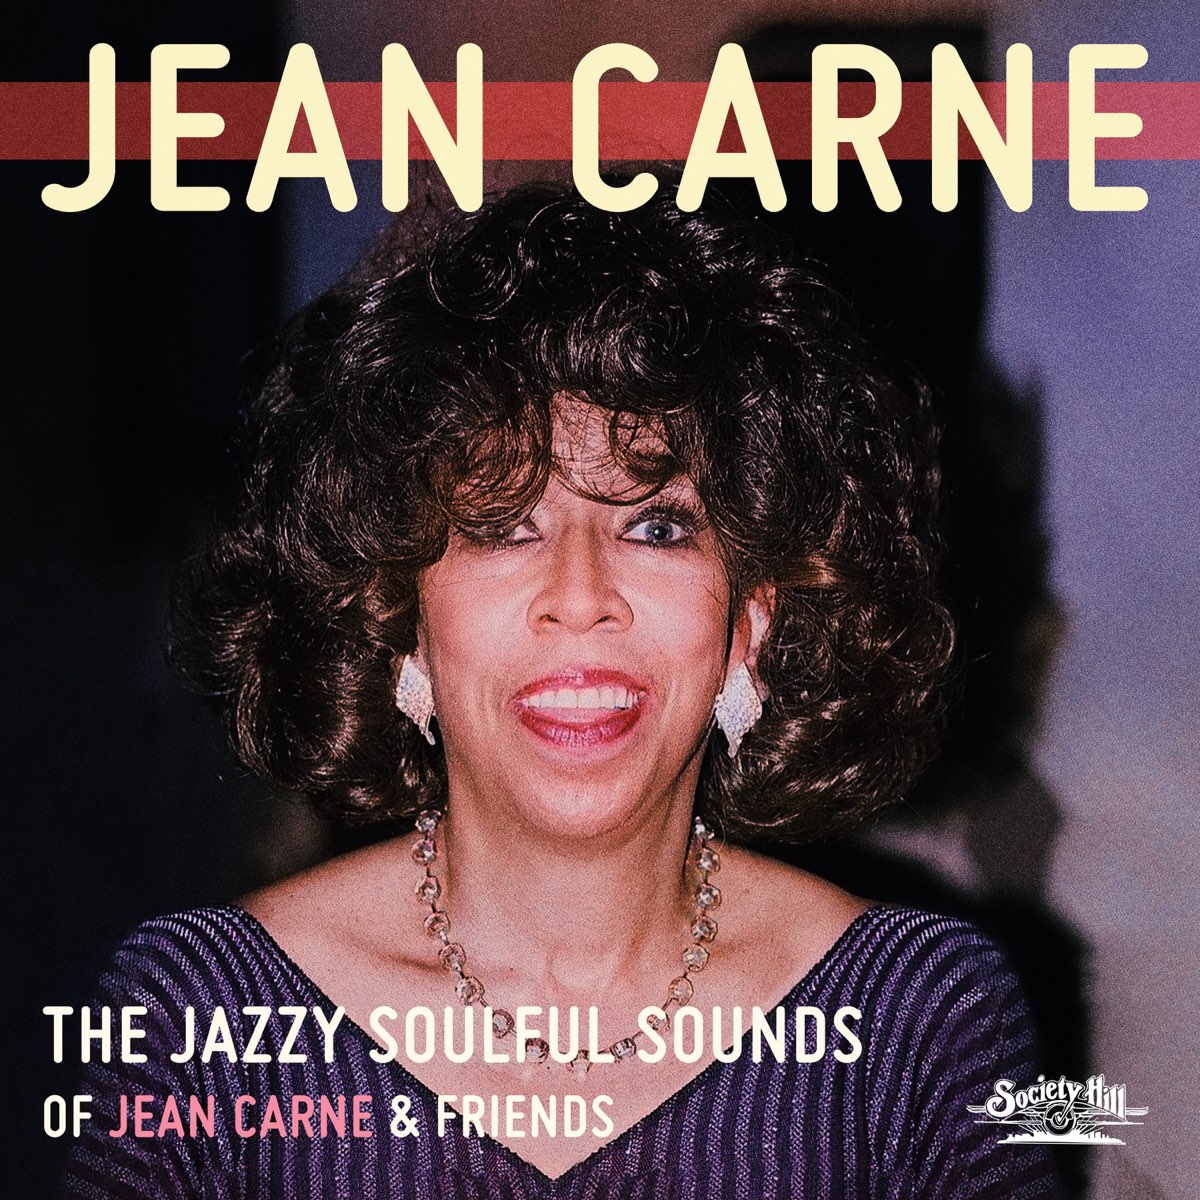 ‎The Jazzy Soulful Sounds of Jean Carne & Friends - Album by Jean Carne ...